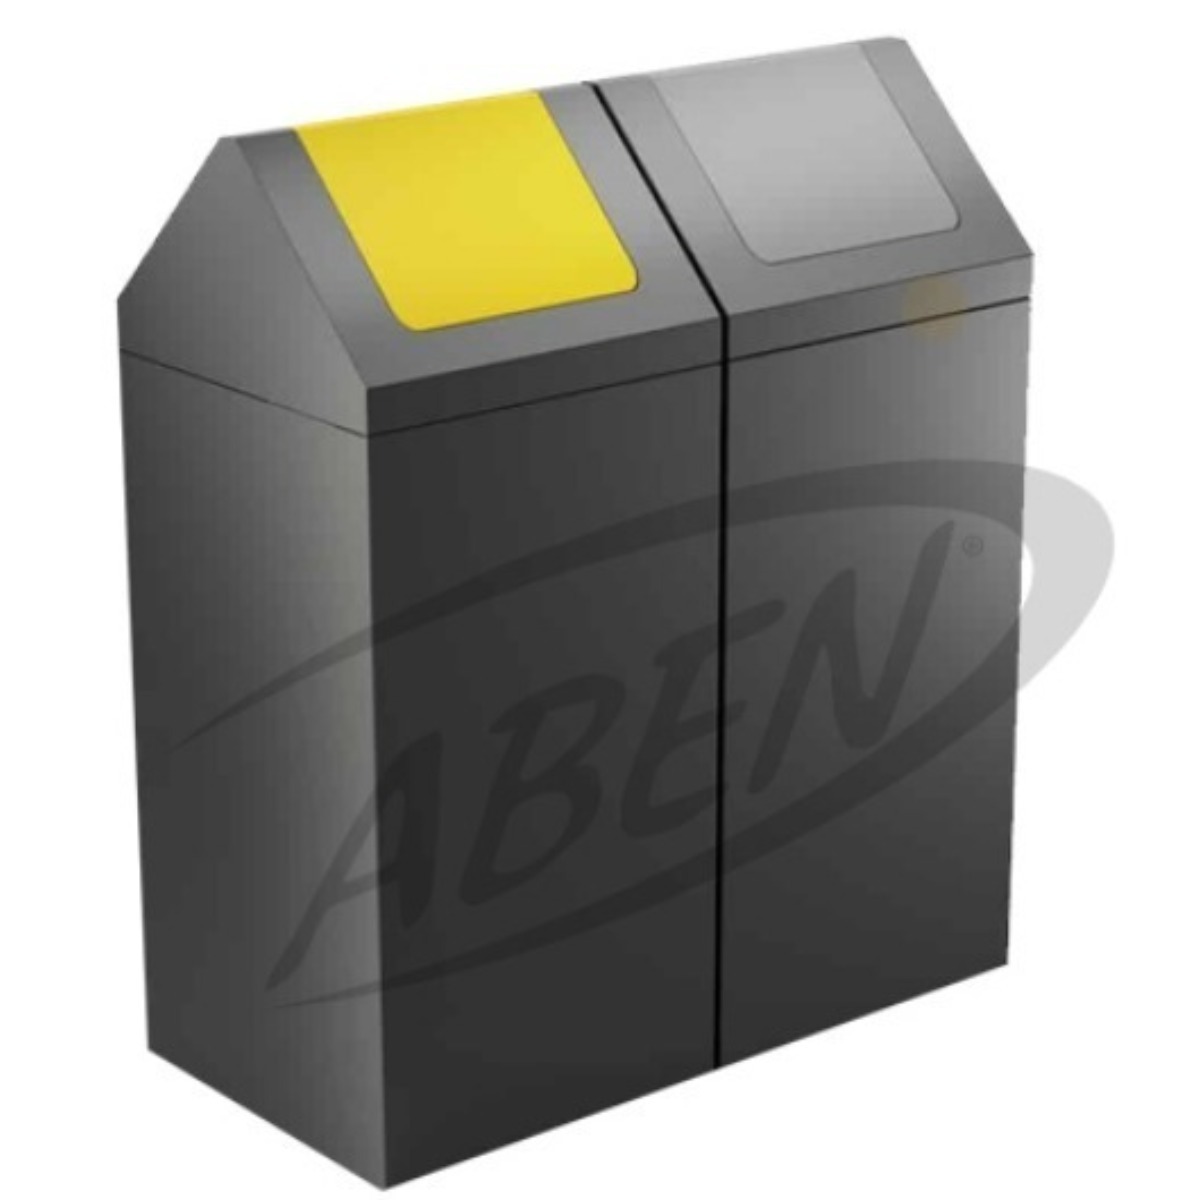 AB-773 2'Part Recycle Bin